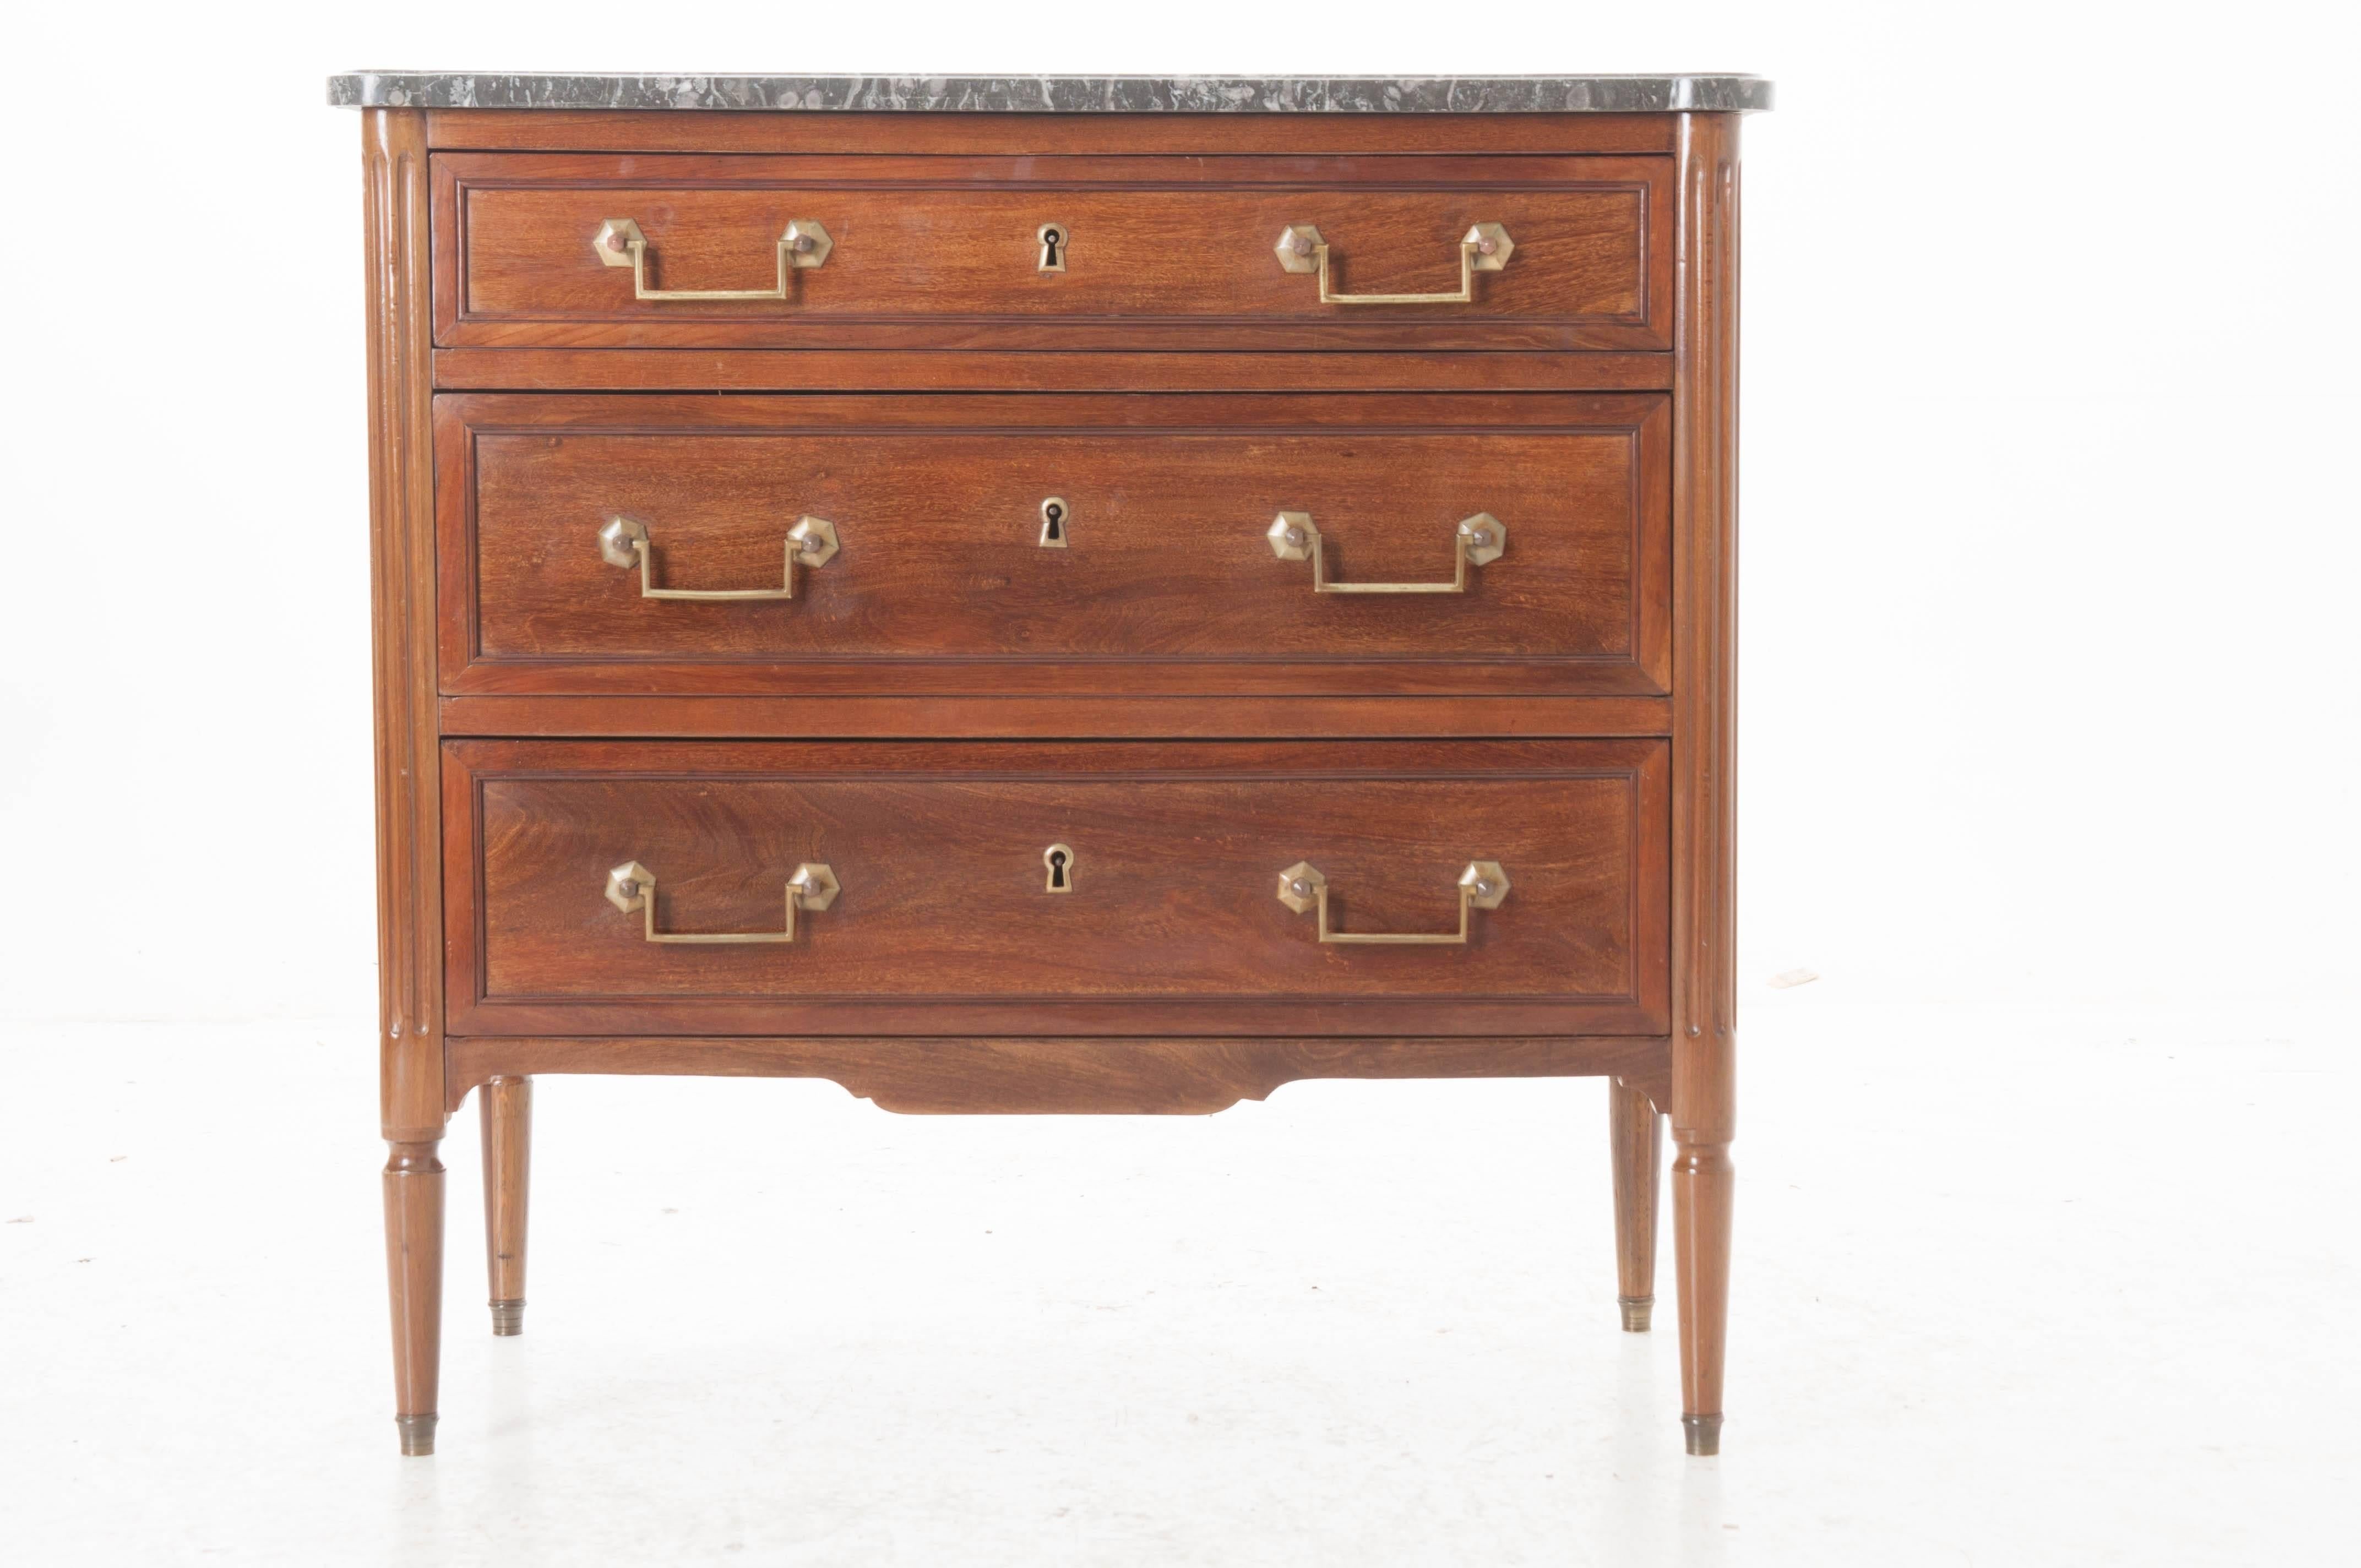 A small mahogany Louis XVI commode with original gray fossil marble top, shaped to fit the three-drawer piece. The drawers have two brass drop bail handles each and are flanked by turreted columns with fluted carving. The commode had a shaped apron